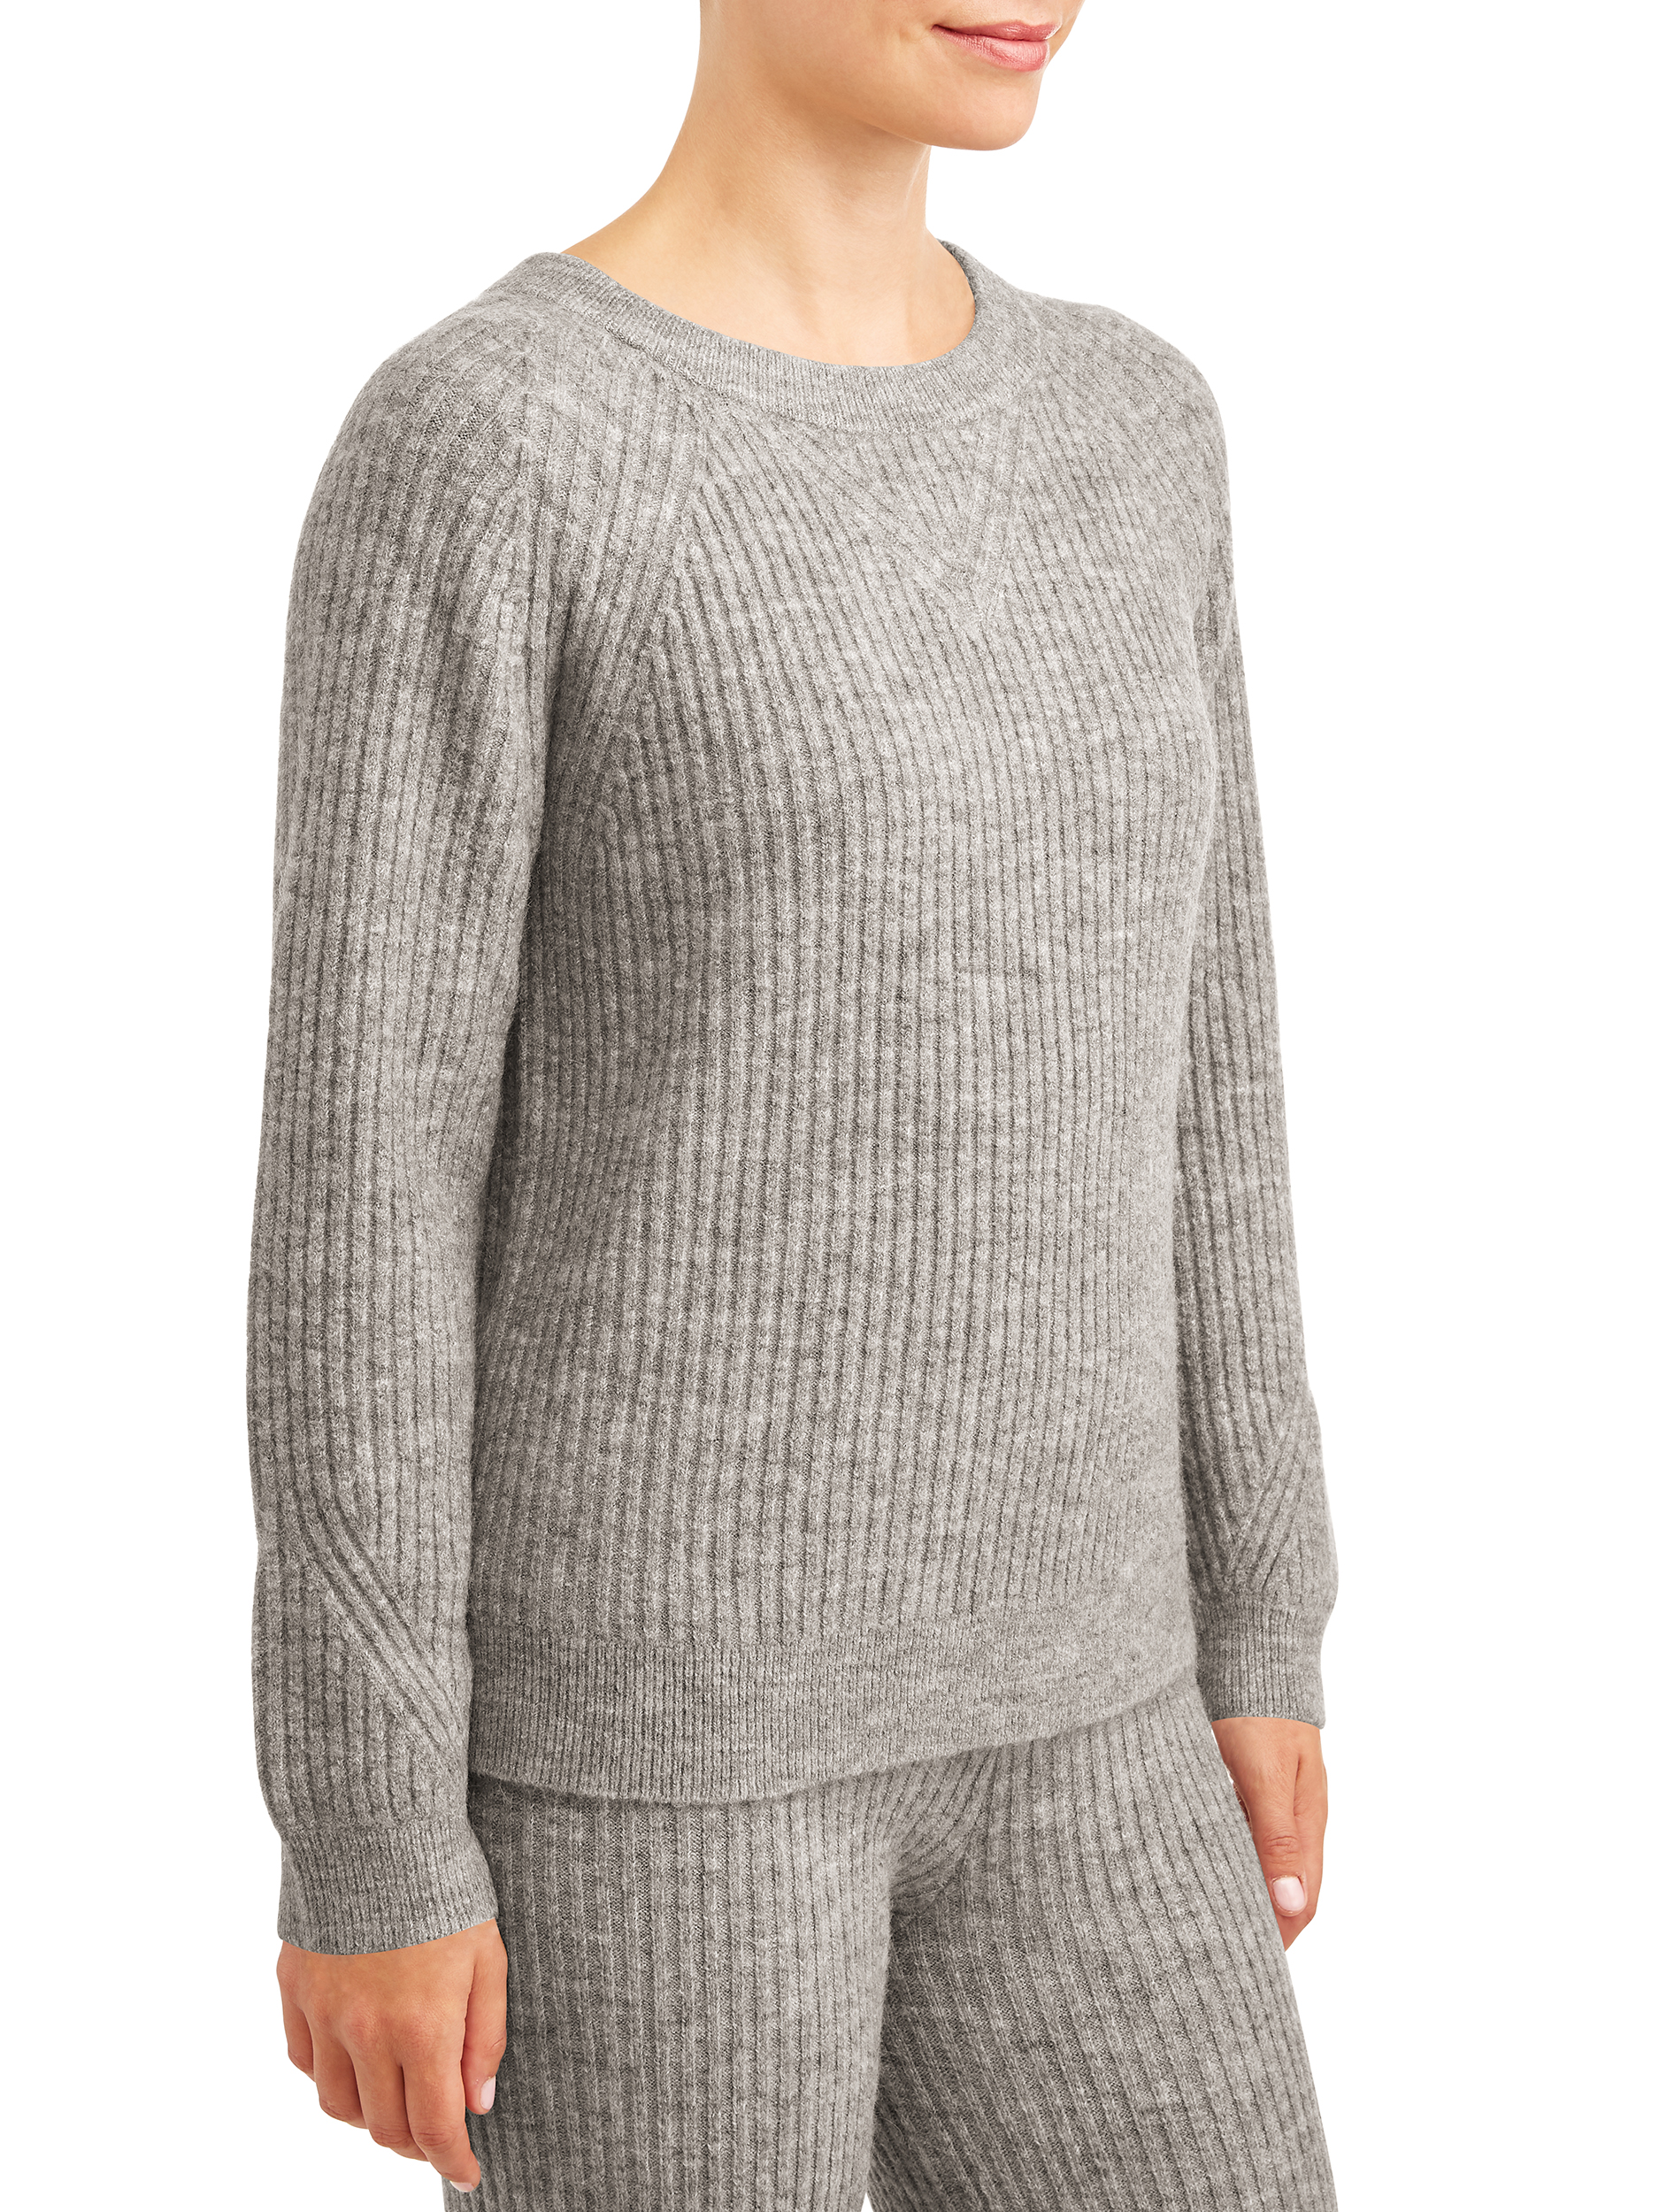 Time and Tru Women's Cozy Ribbed Sweater - image 4 of 5